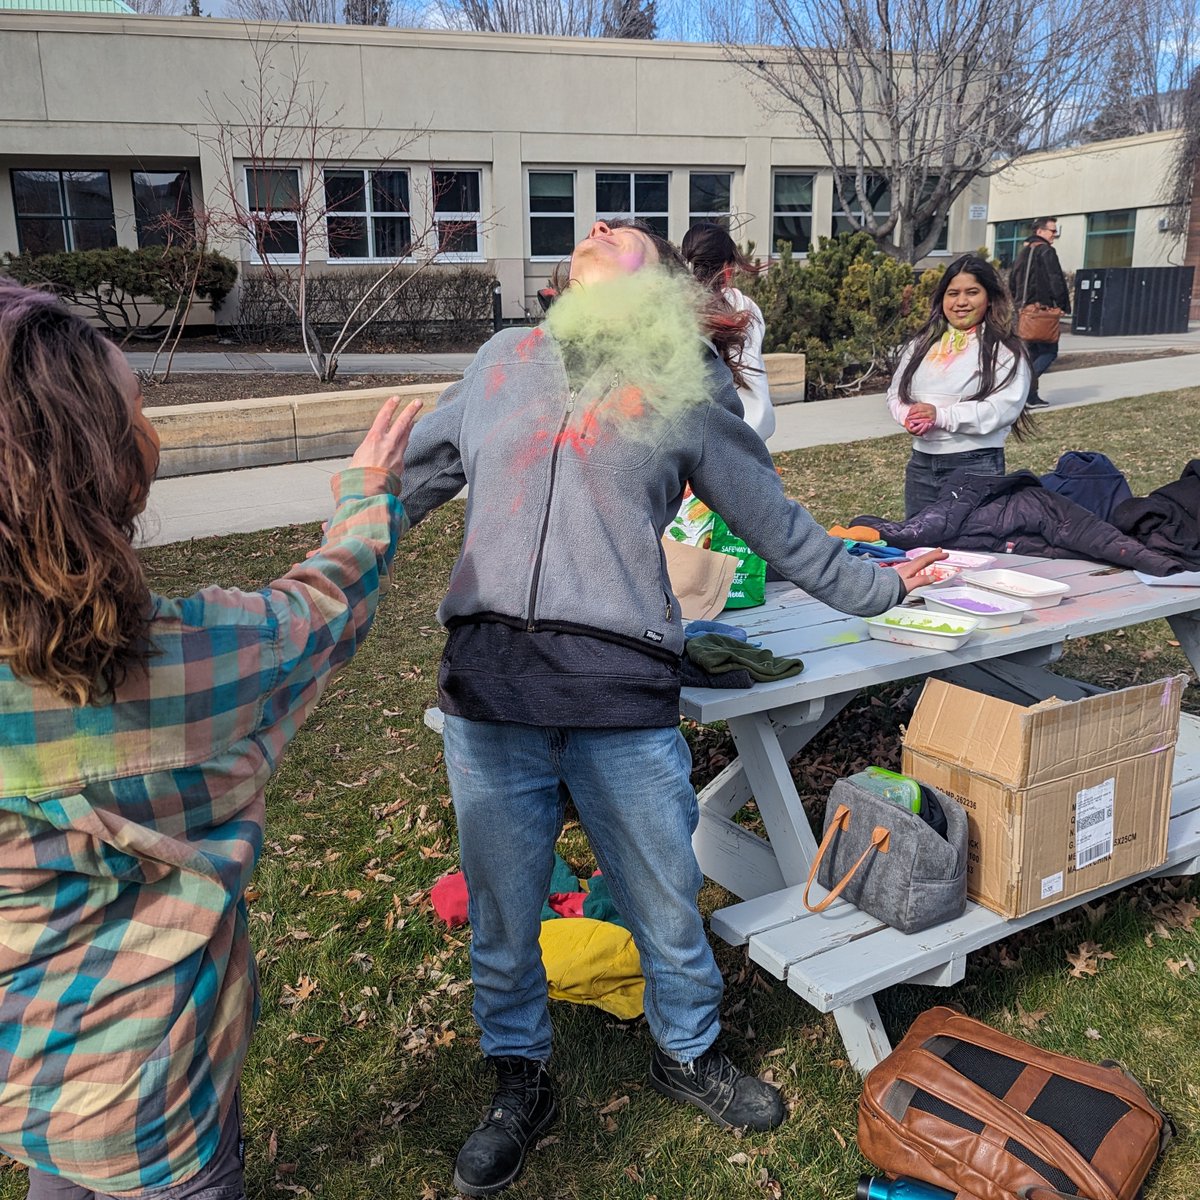 Students and staff at the Penticton campus took part in a colorful celebration of Holi’- A Festival of Colors!